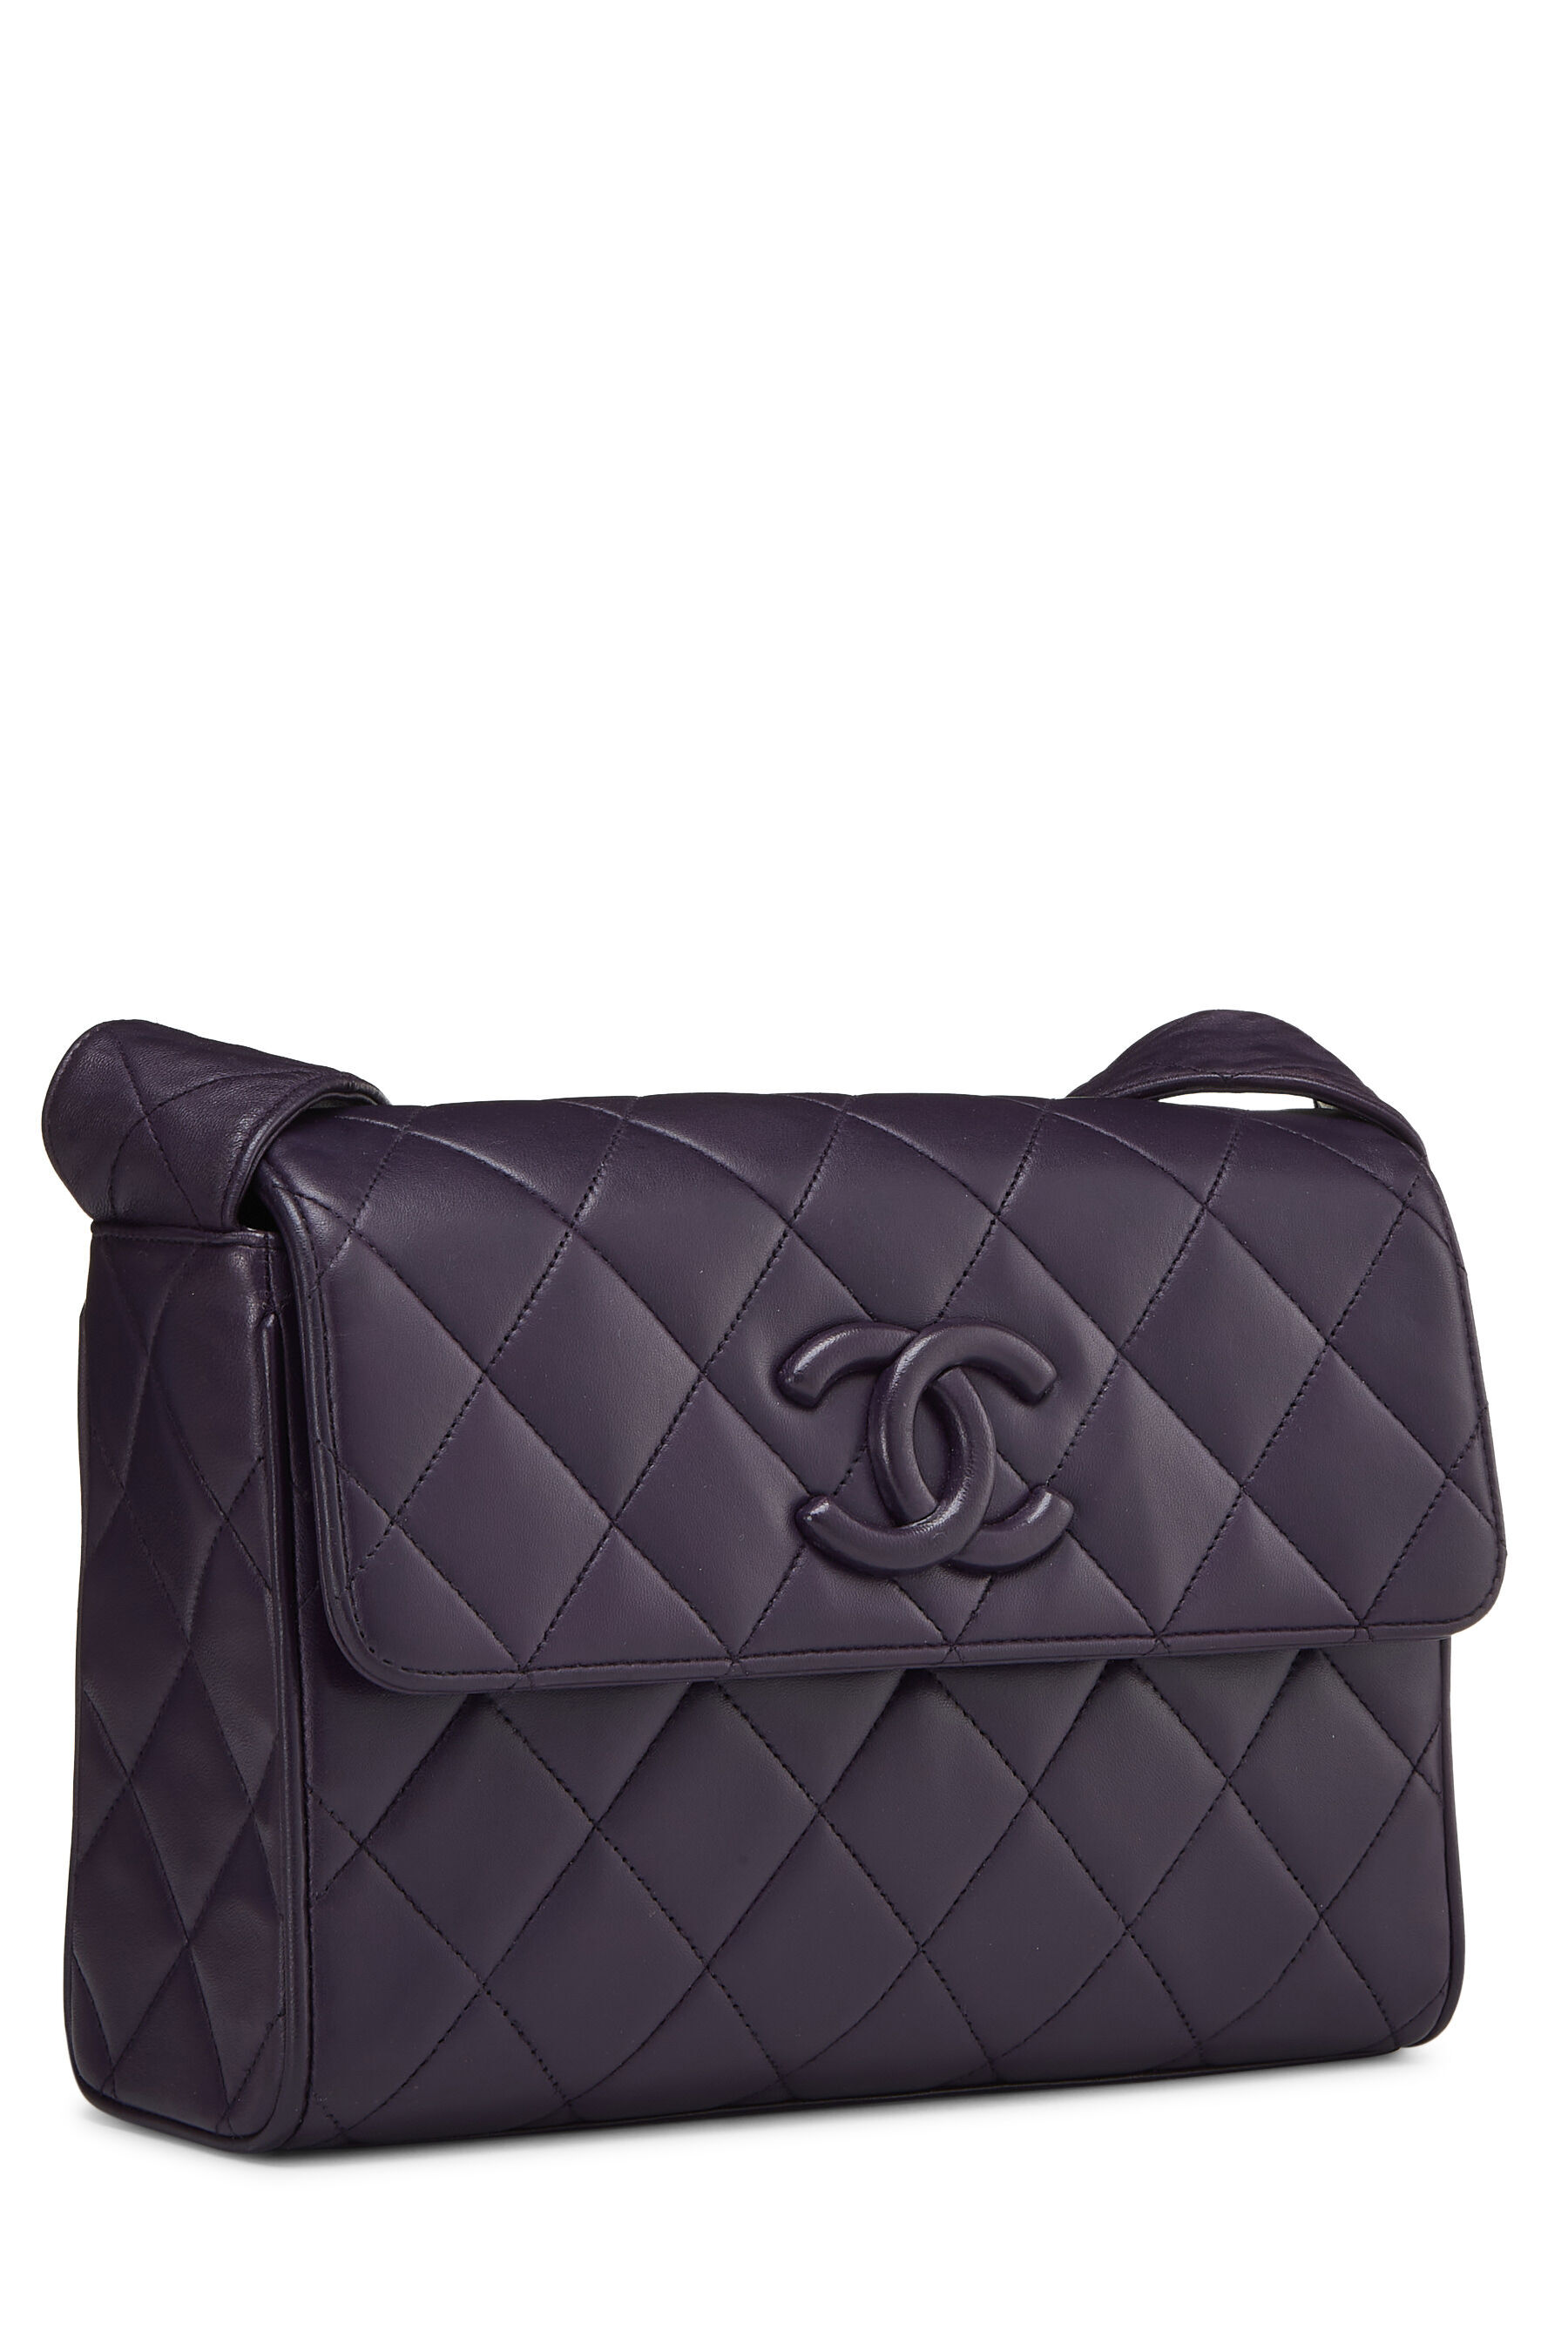 Chanel Bubble Quilted Flap Bag Luxury Bags  Wallets on Carousell